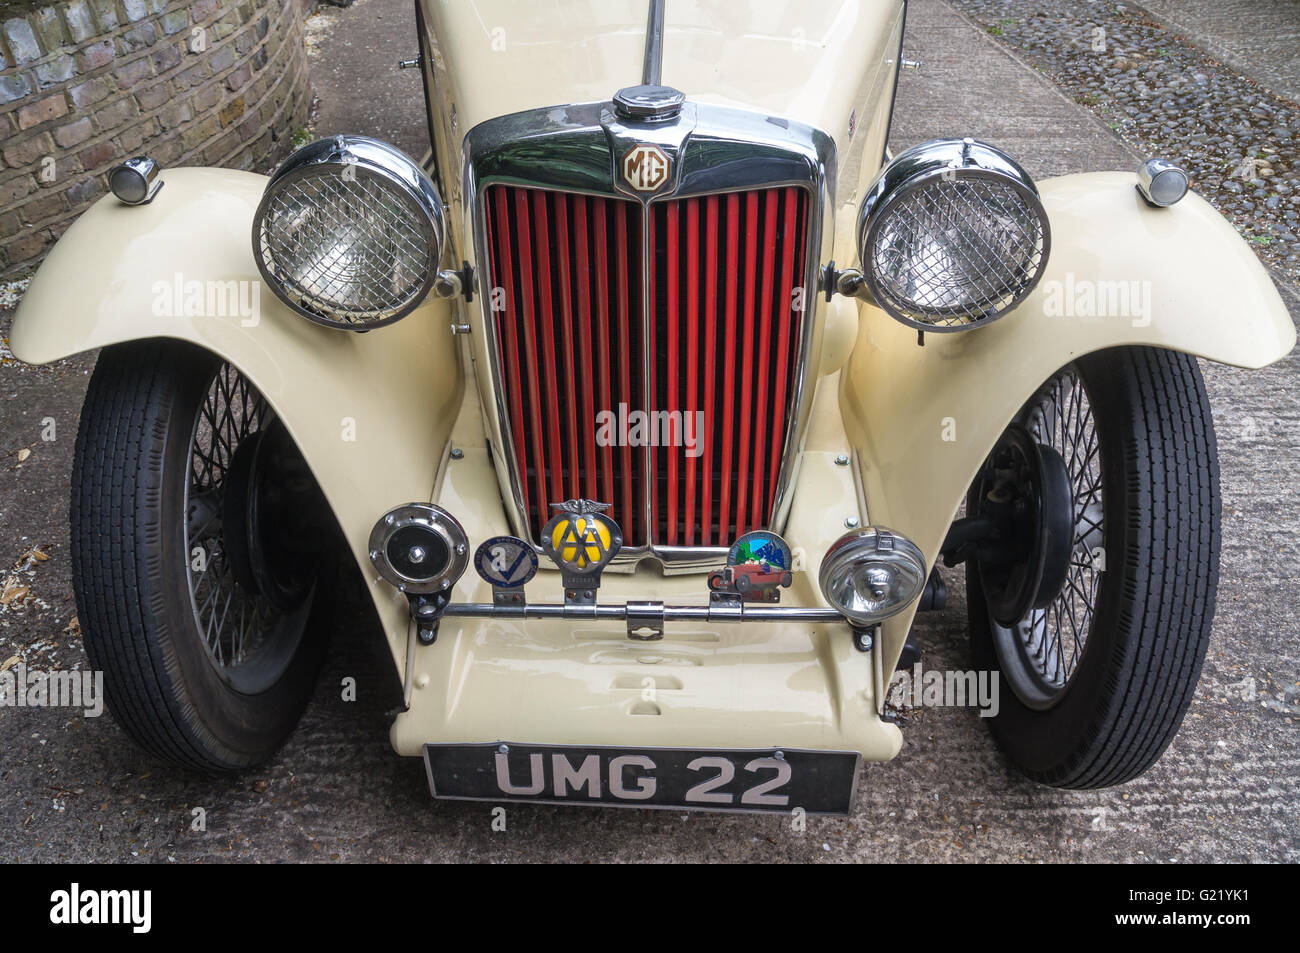 1949 MG TC sports car UMG 22 sold by University Motors of Sussex and London. Stock Photo